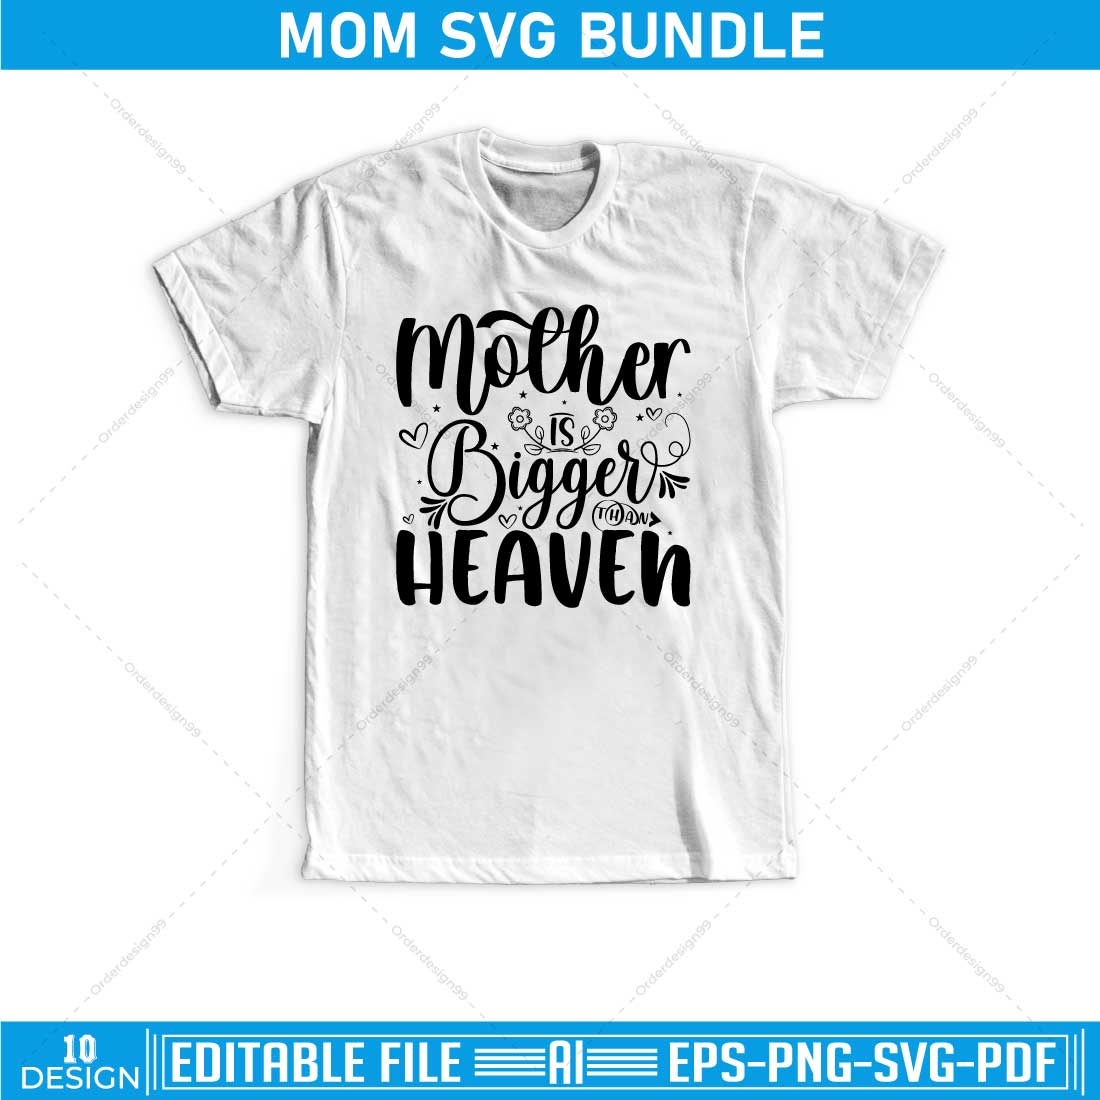 Mother is bigger than heaven t - shirt.